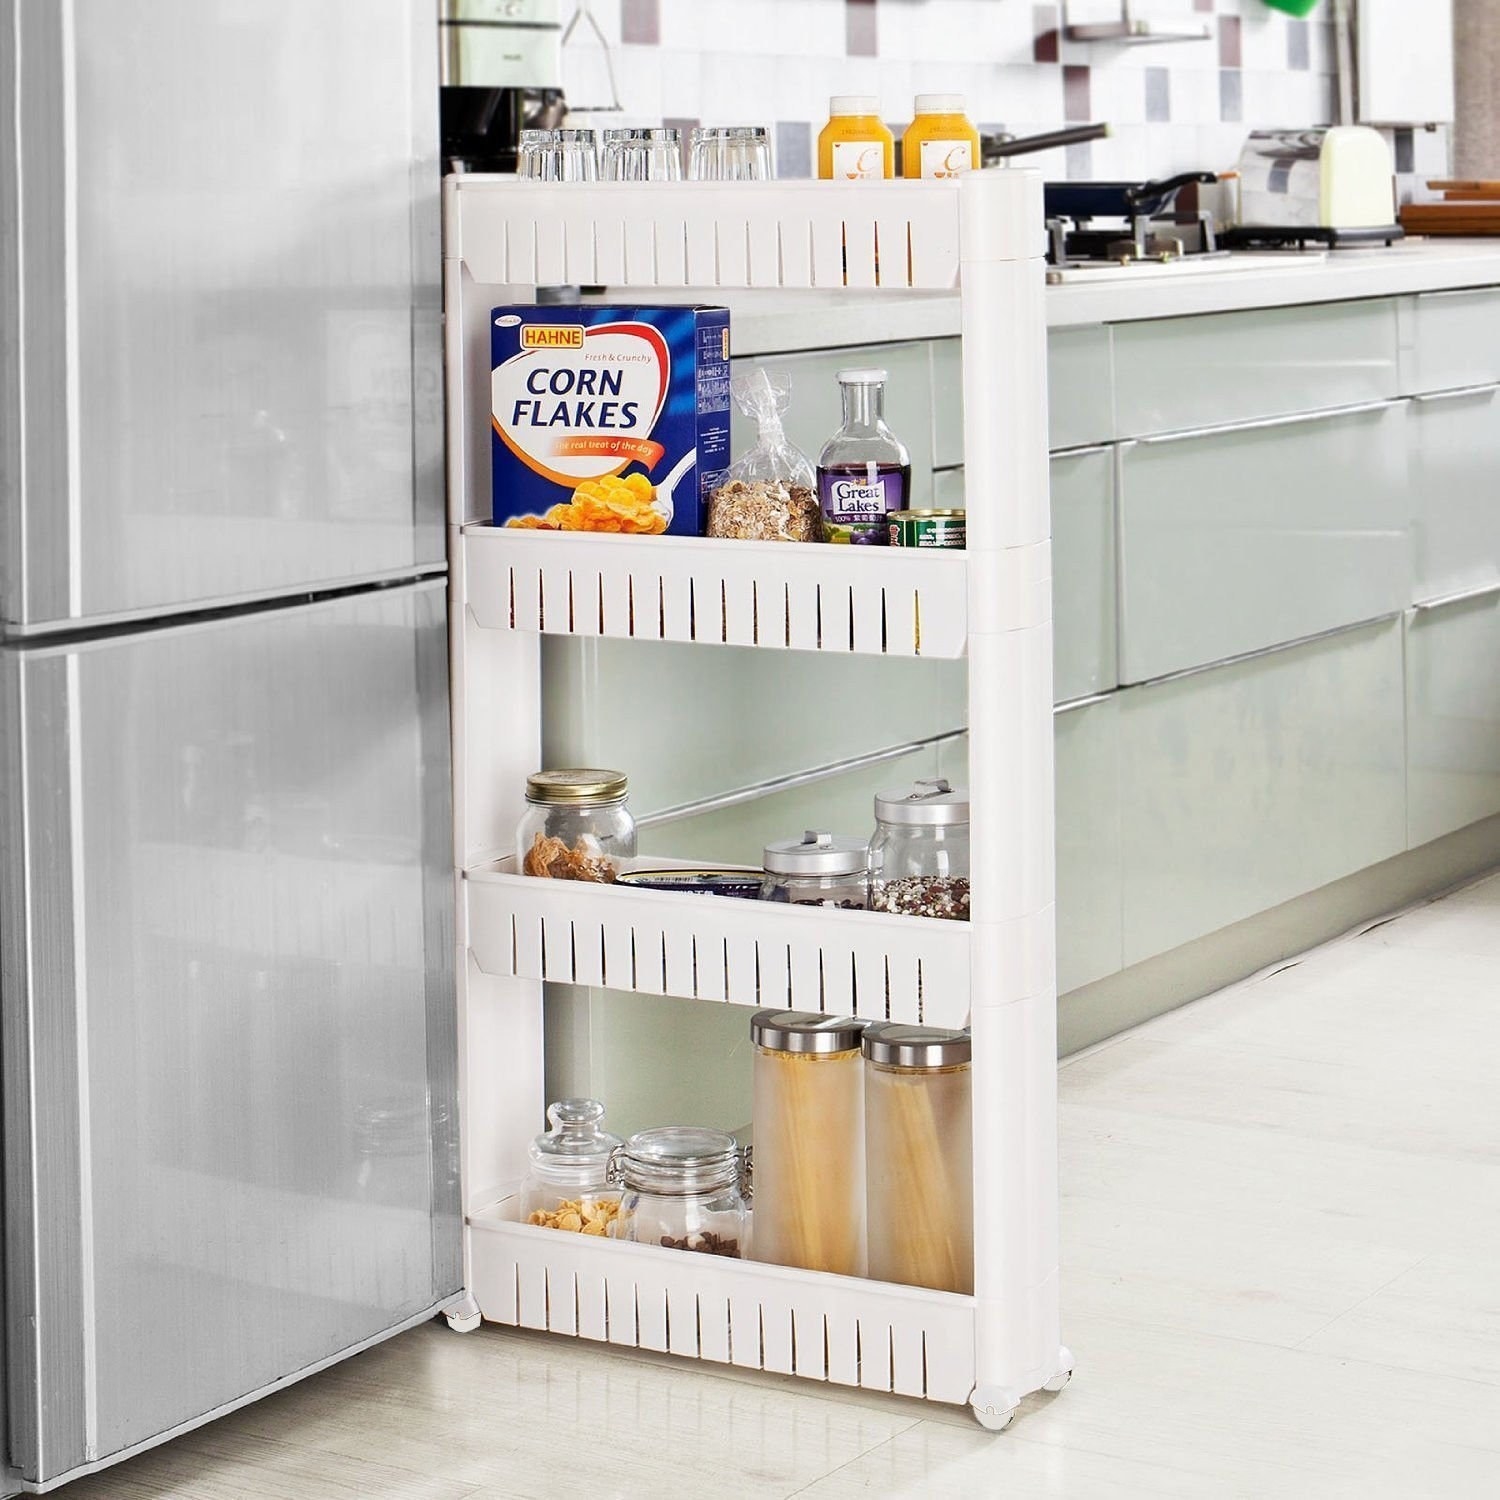 The rack being used to store kitchen products like cereal, pasta, sauces, and glassware.